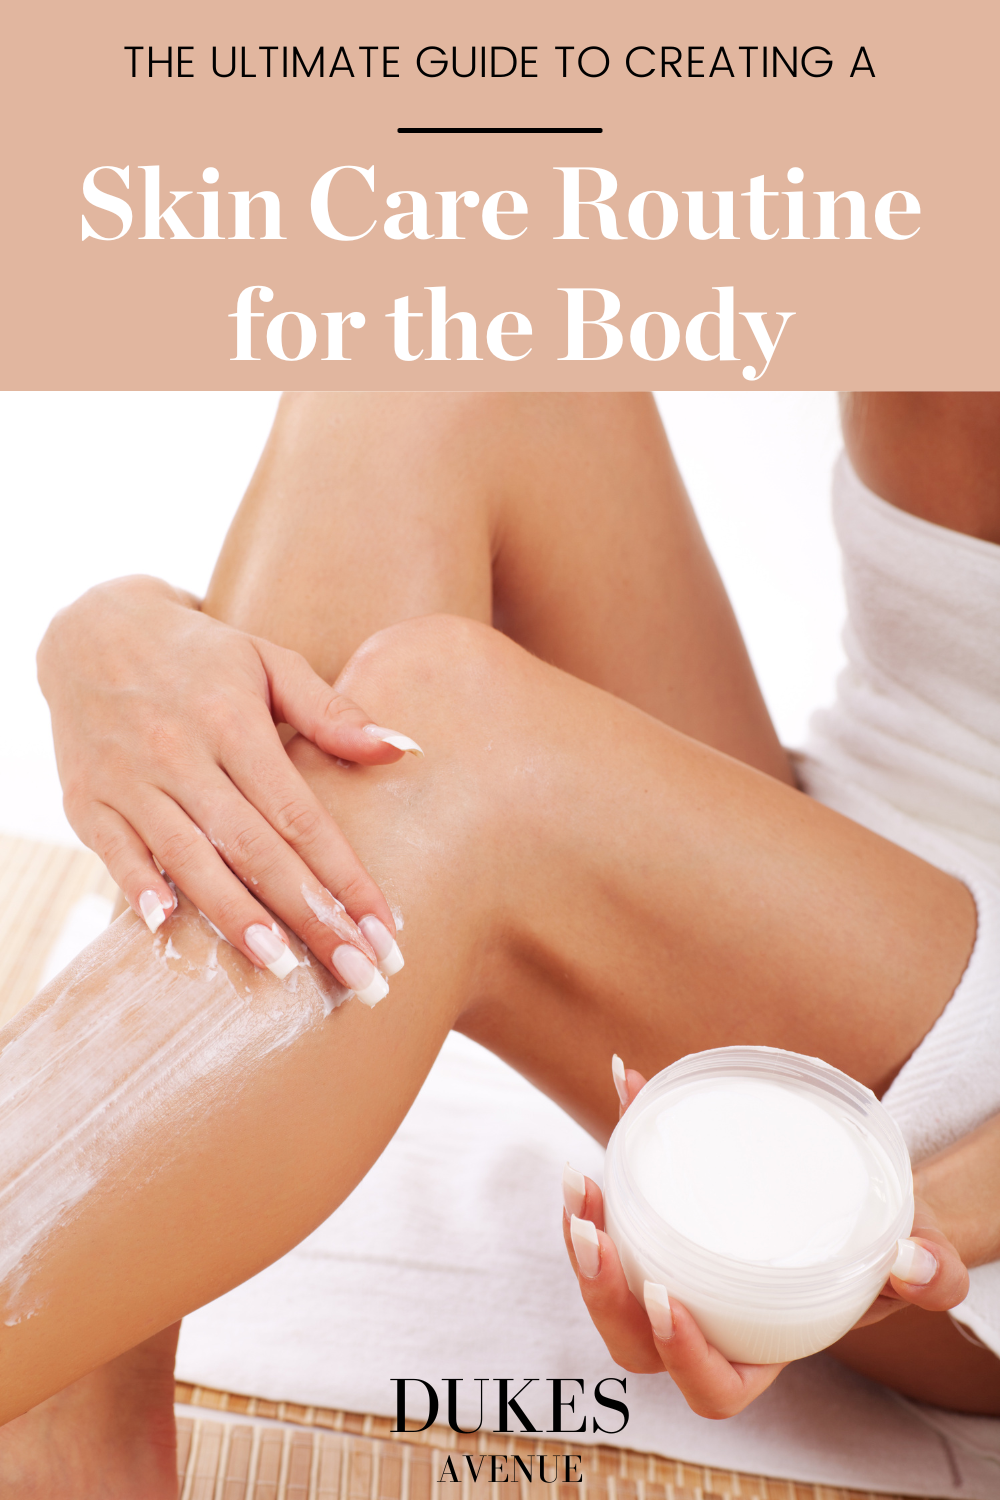 Woman applying body lotion to legs with text overlay 'Skin Care Routine for the Body'